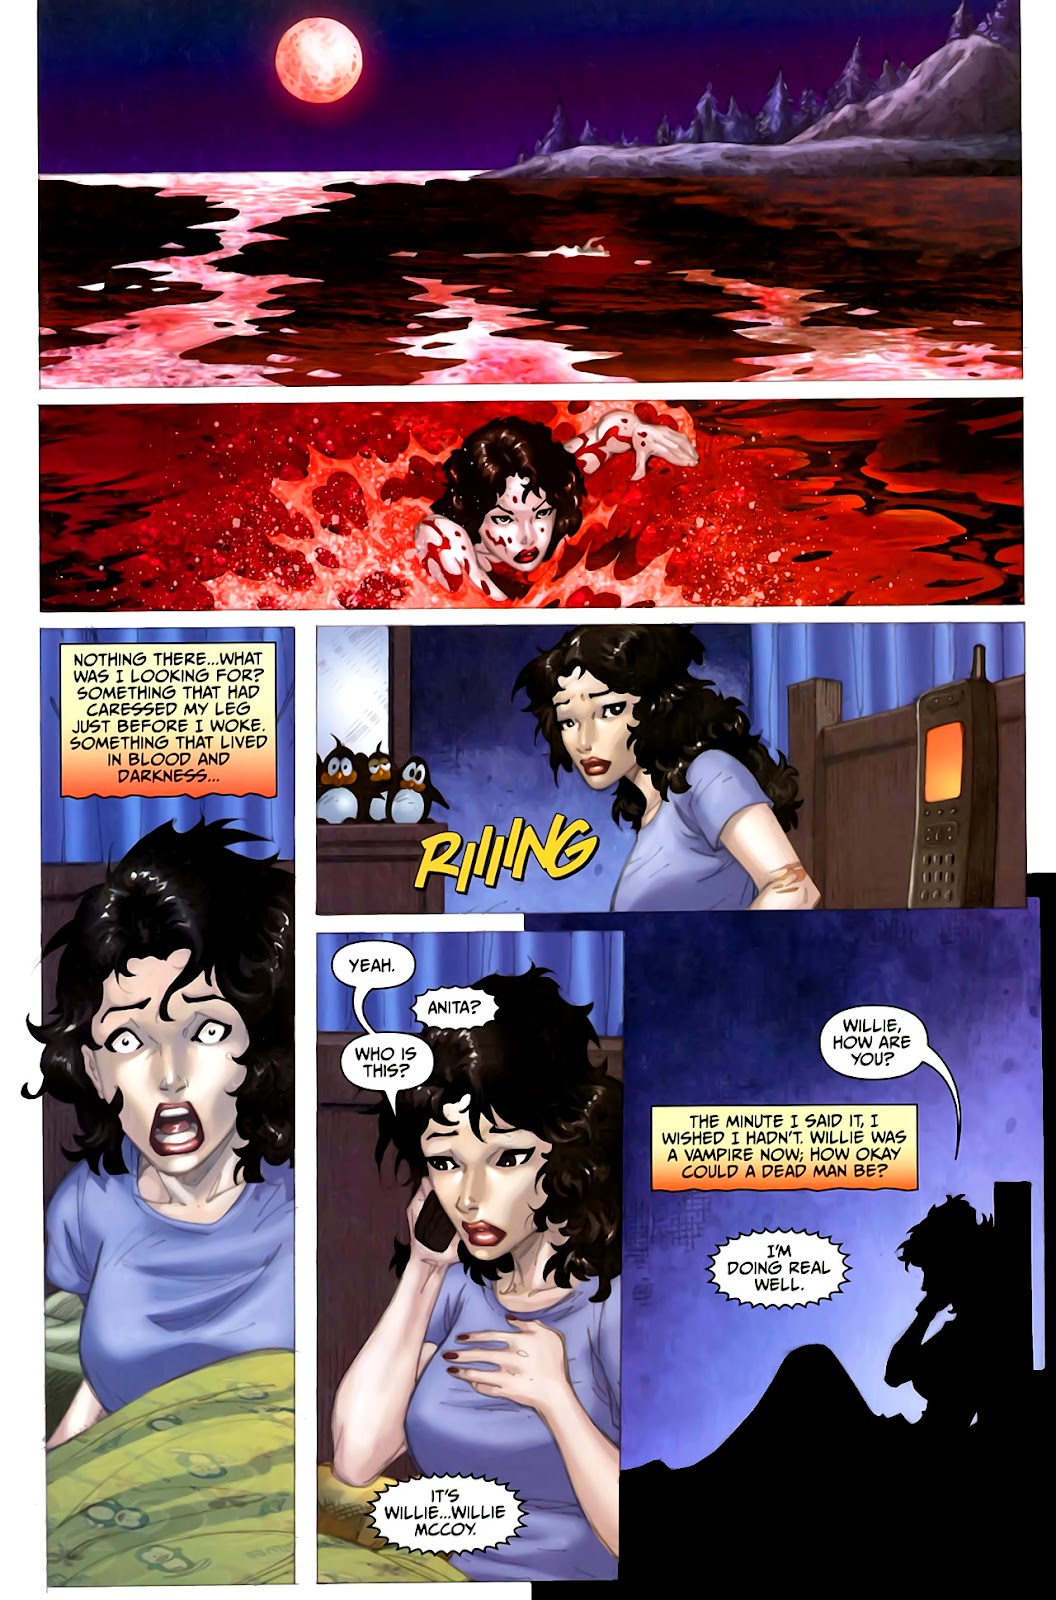 Anita Blake, Vampire Hunter: Circus of the Damned - The Charmer issue 2 - Page 4